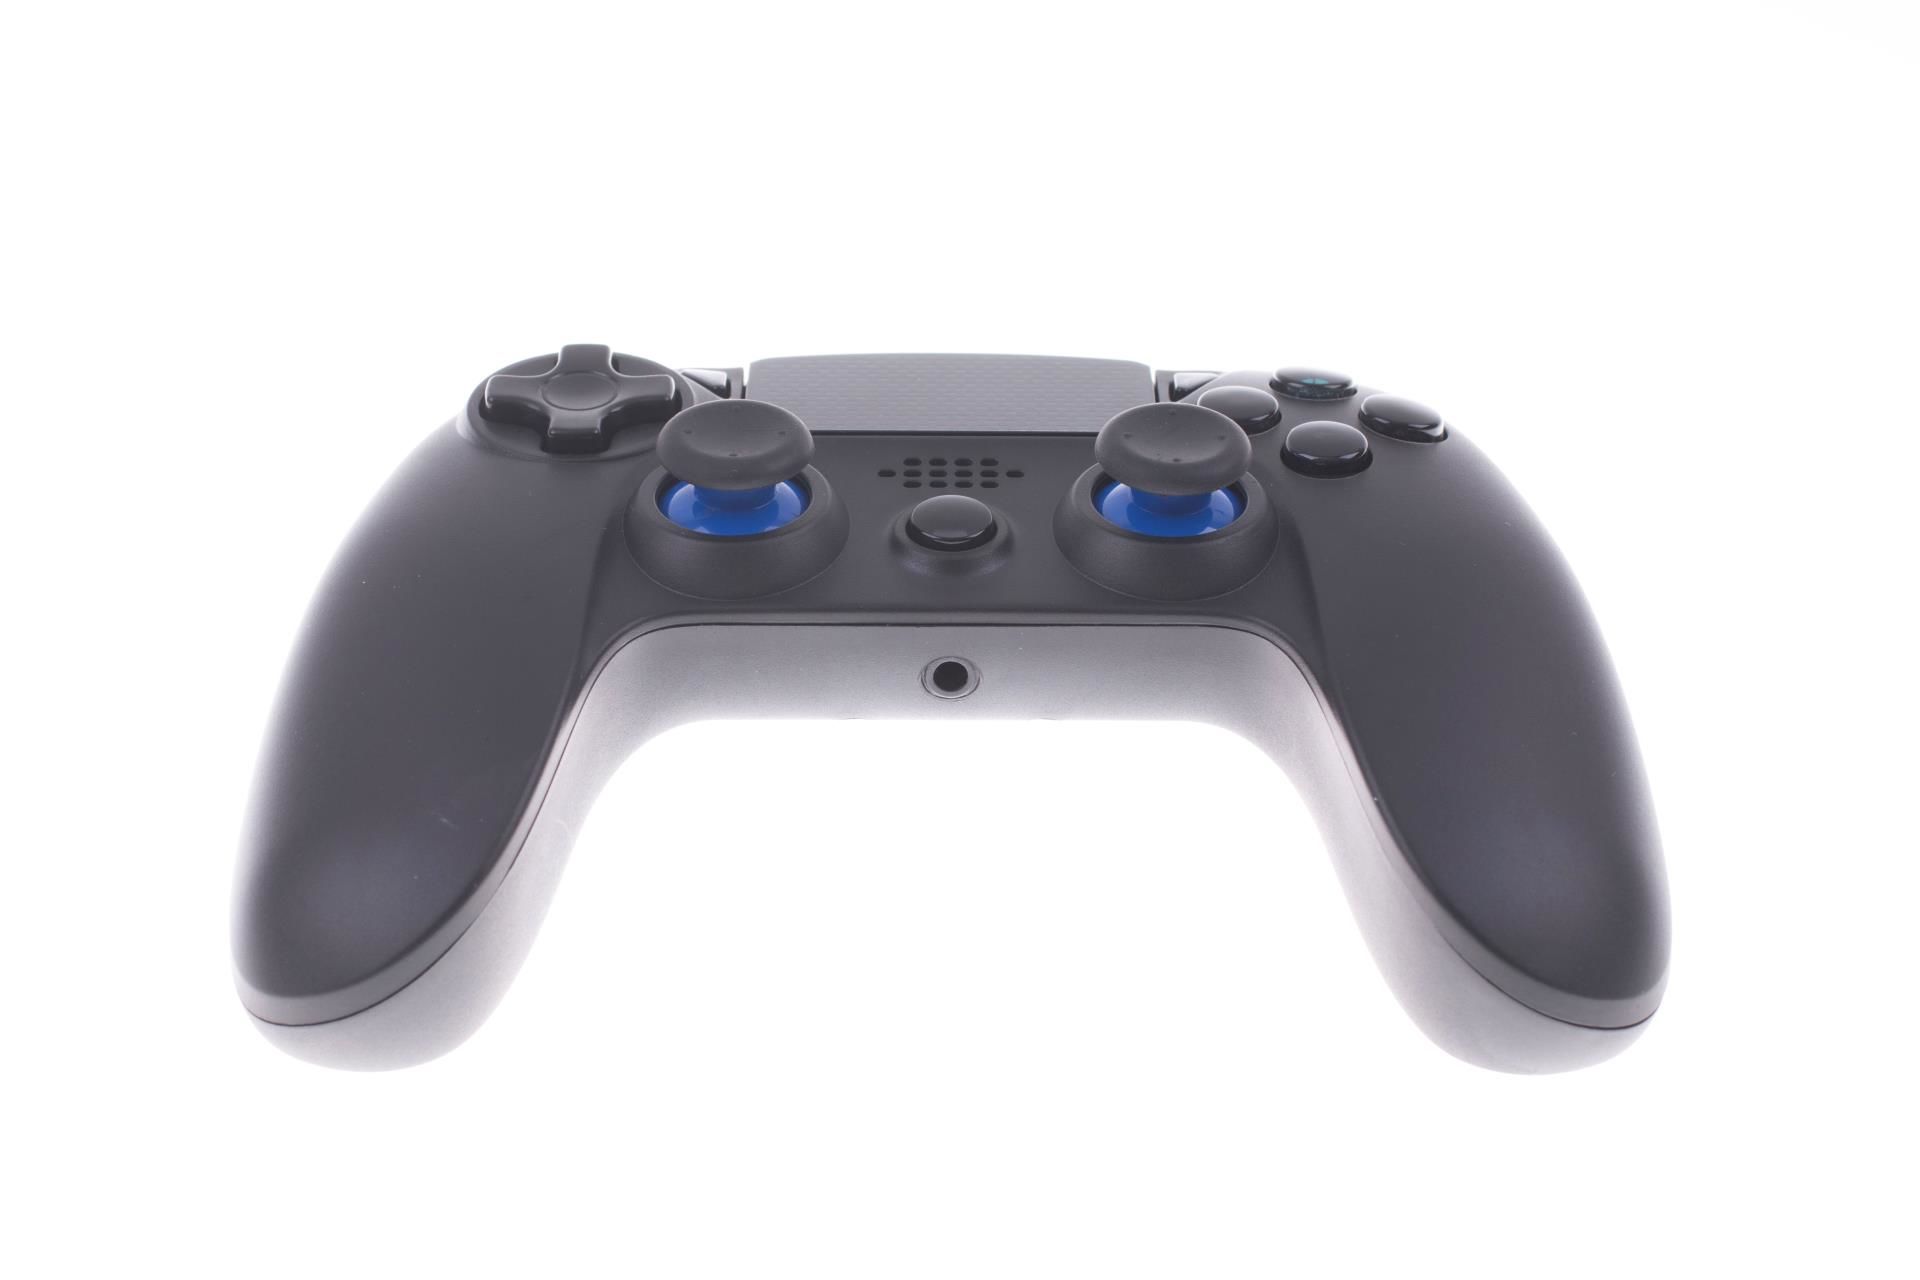 PS4 Wireless Controller Black